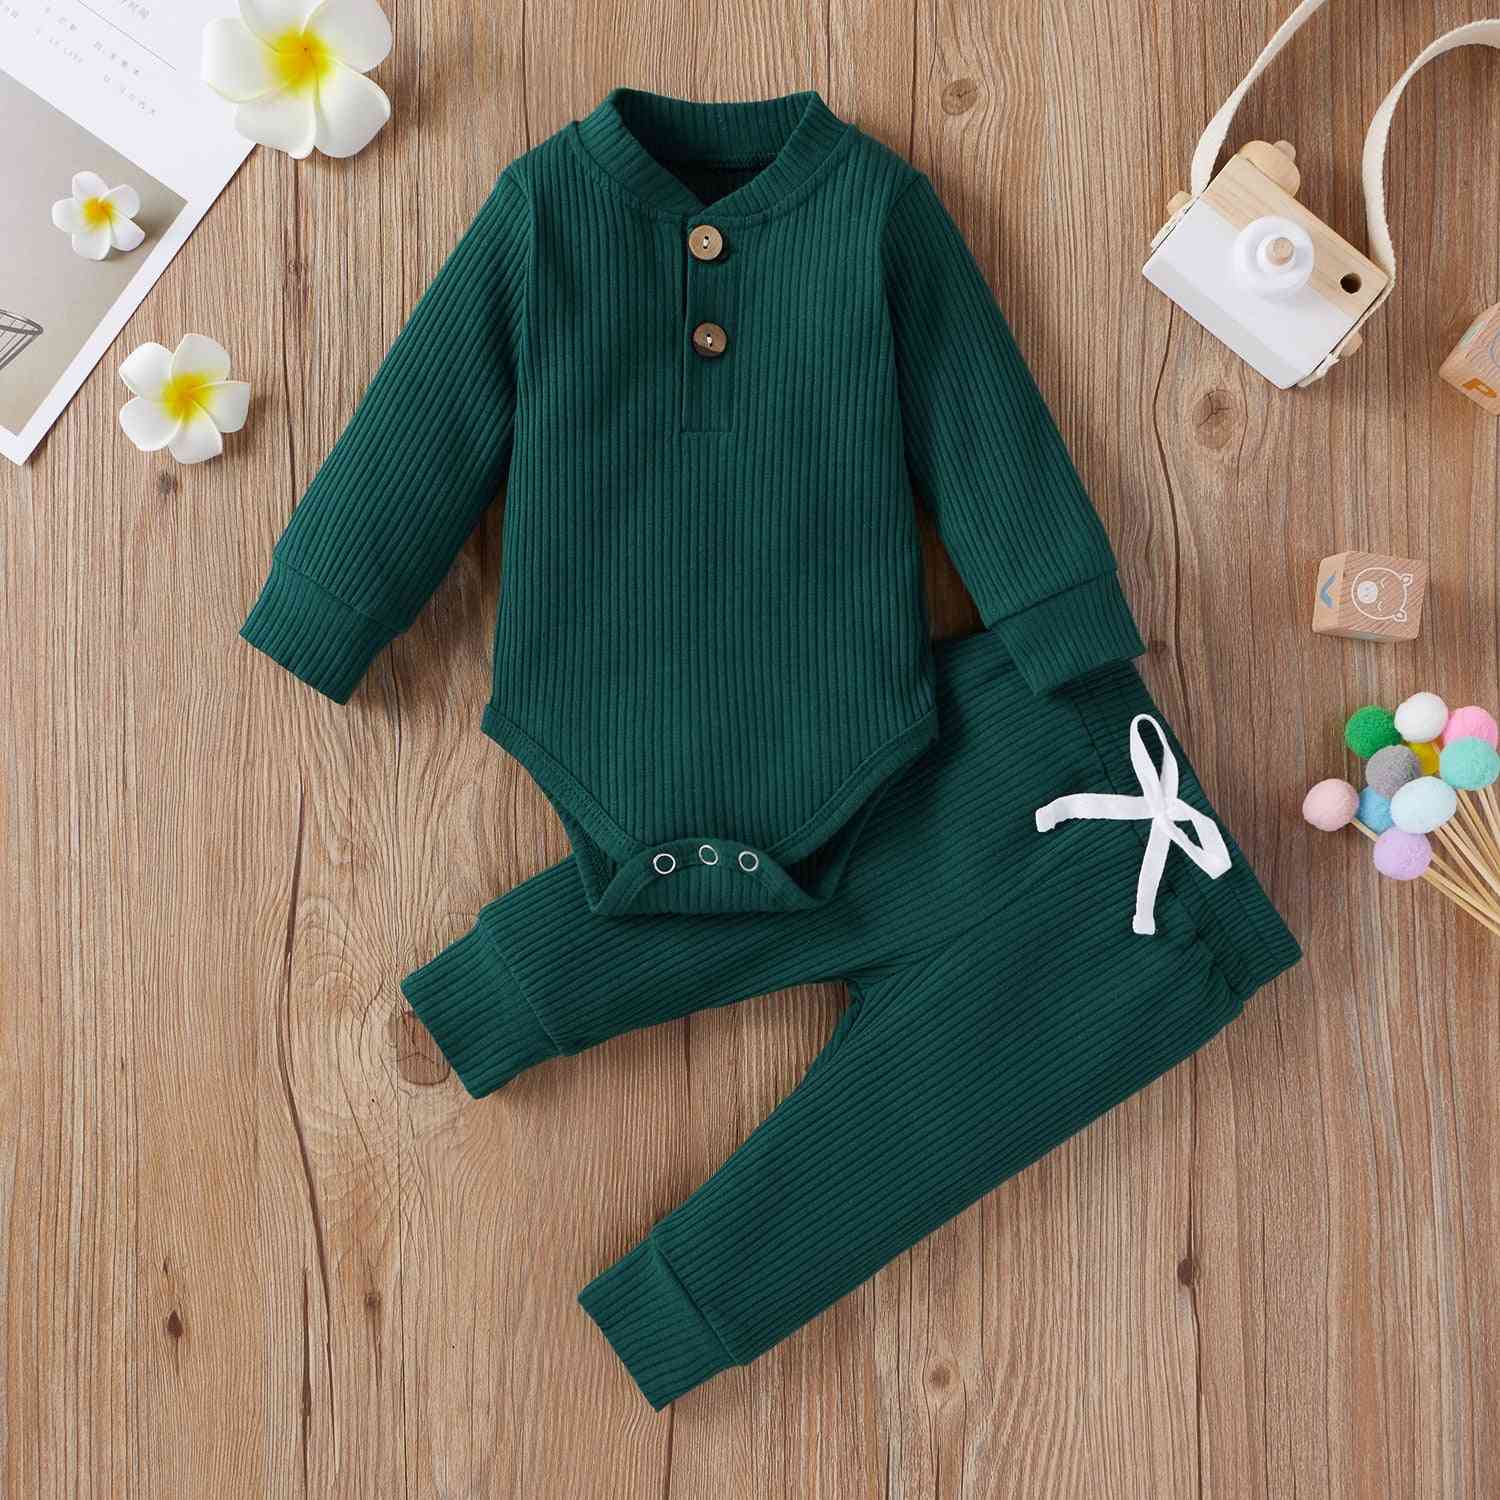 Baby Outfits Infant Toddler Winter Pants Top Sets